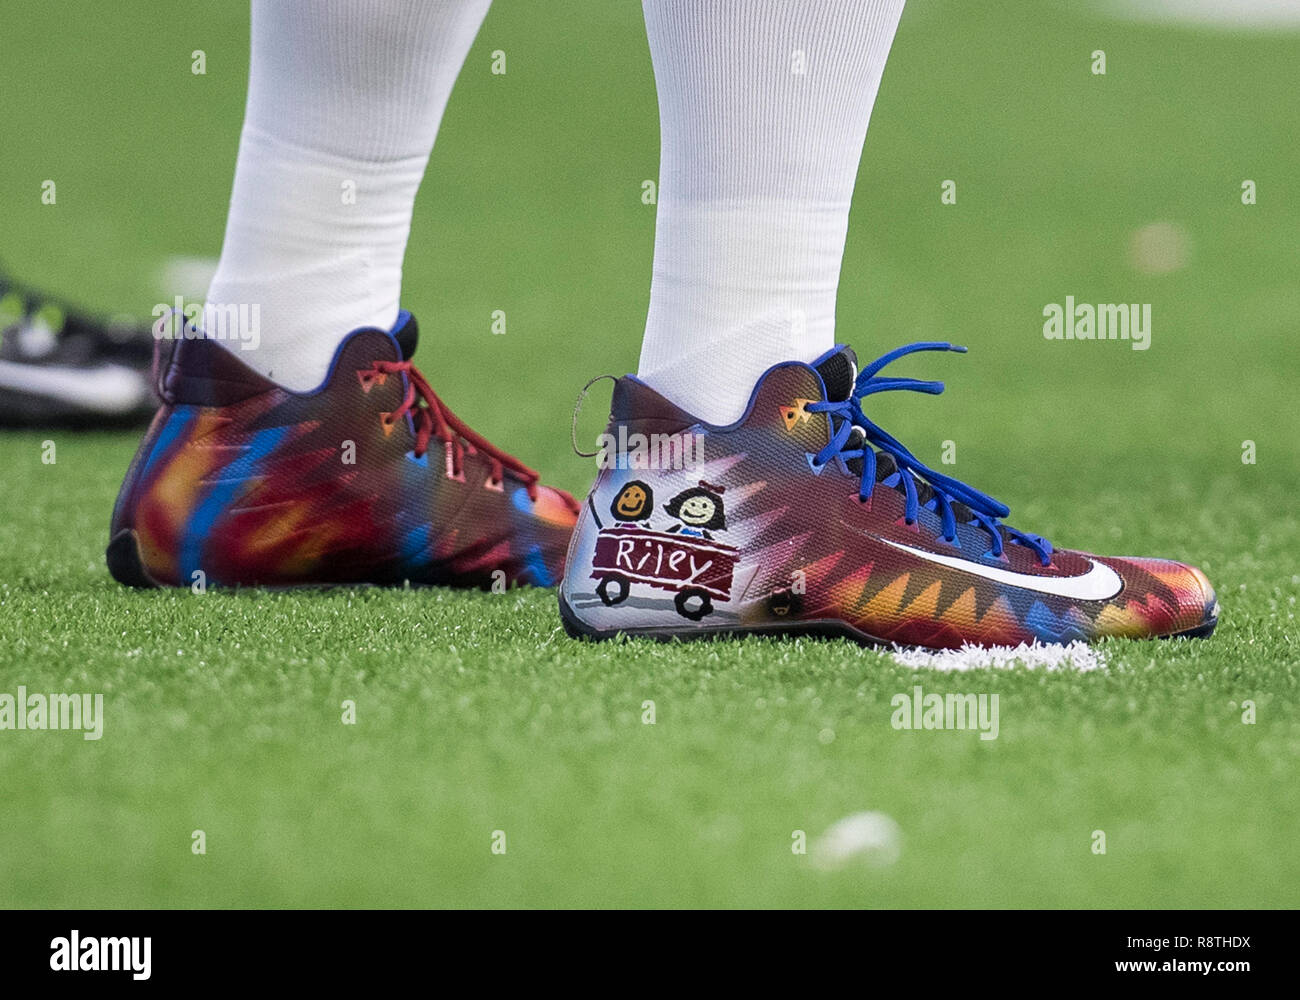 Indianapolis, Indiana, USA. 16th Dec, 2018. Indianapolis Colts quarterback Andrew Luck (12) my cause, my cleats for Riley Children's Hospital during NFL football game action between the Dallas Cowboys and the Indianapolis Colts at Lucas Oil Stadium in Indianapolis, Indiana. Indianapolis defeated Dallas 23-0. John Mersits/CSM/Alamy Live News Stock Photo